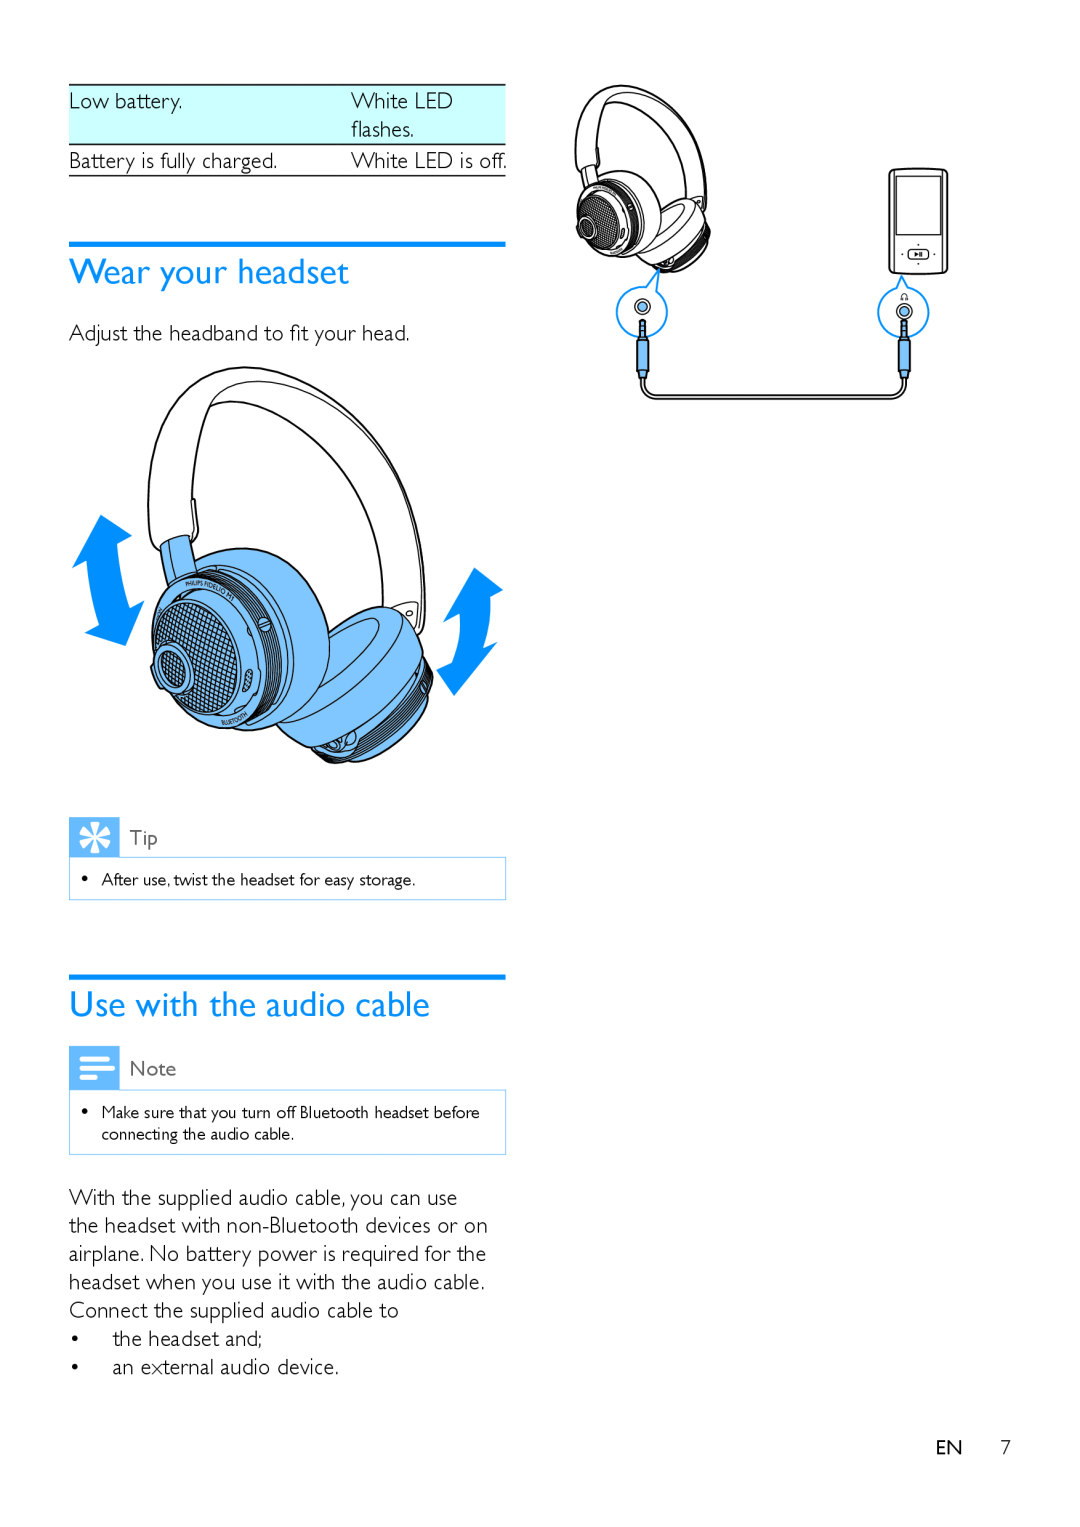 Philips M1BT Wear your headset, Use with the audio cable, Low battery, White LED, flashes, Battery is fully charged 